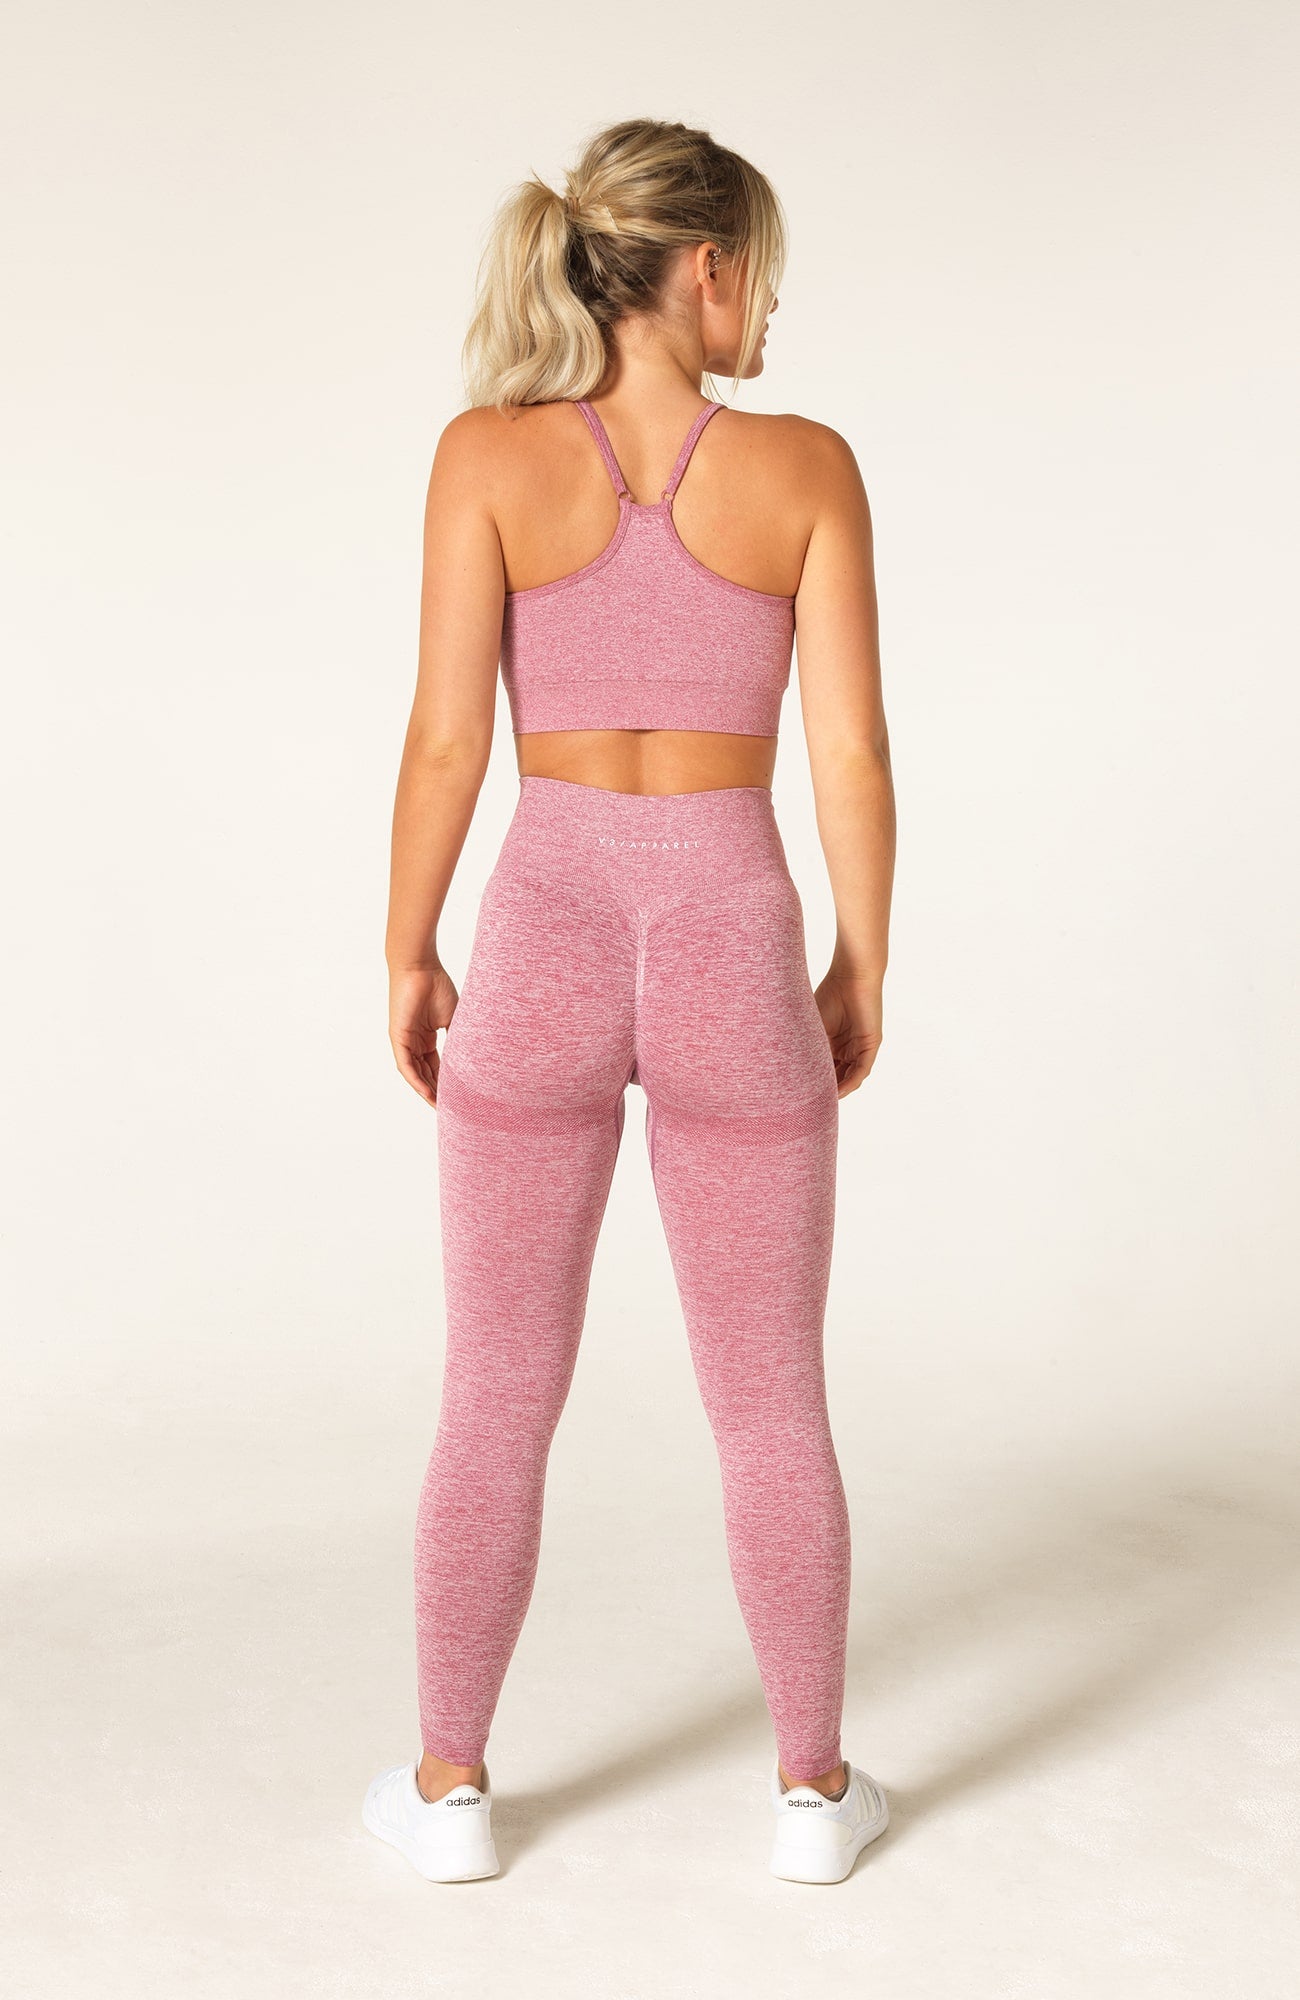 V3 Apparel womens Define Pink marl scrunch bum shaping workout gym leggings and squat proof fitness tights with high waisted and ruched seam for running, yoga, gym bodybuilding and training.